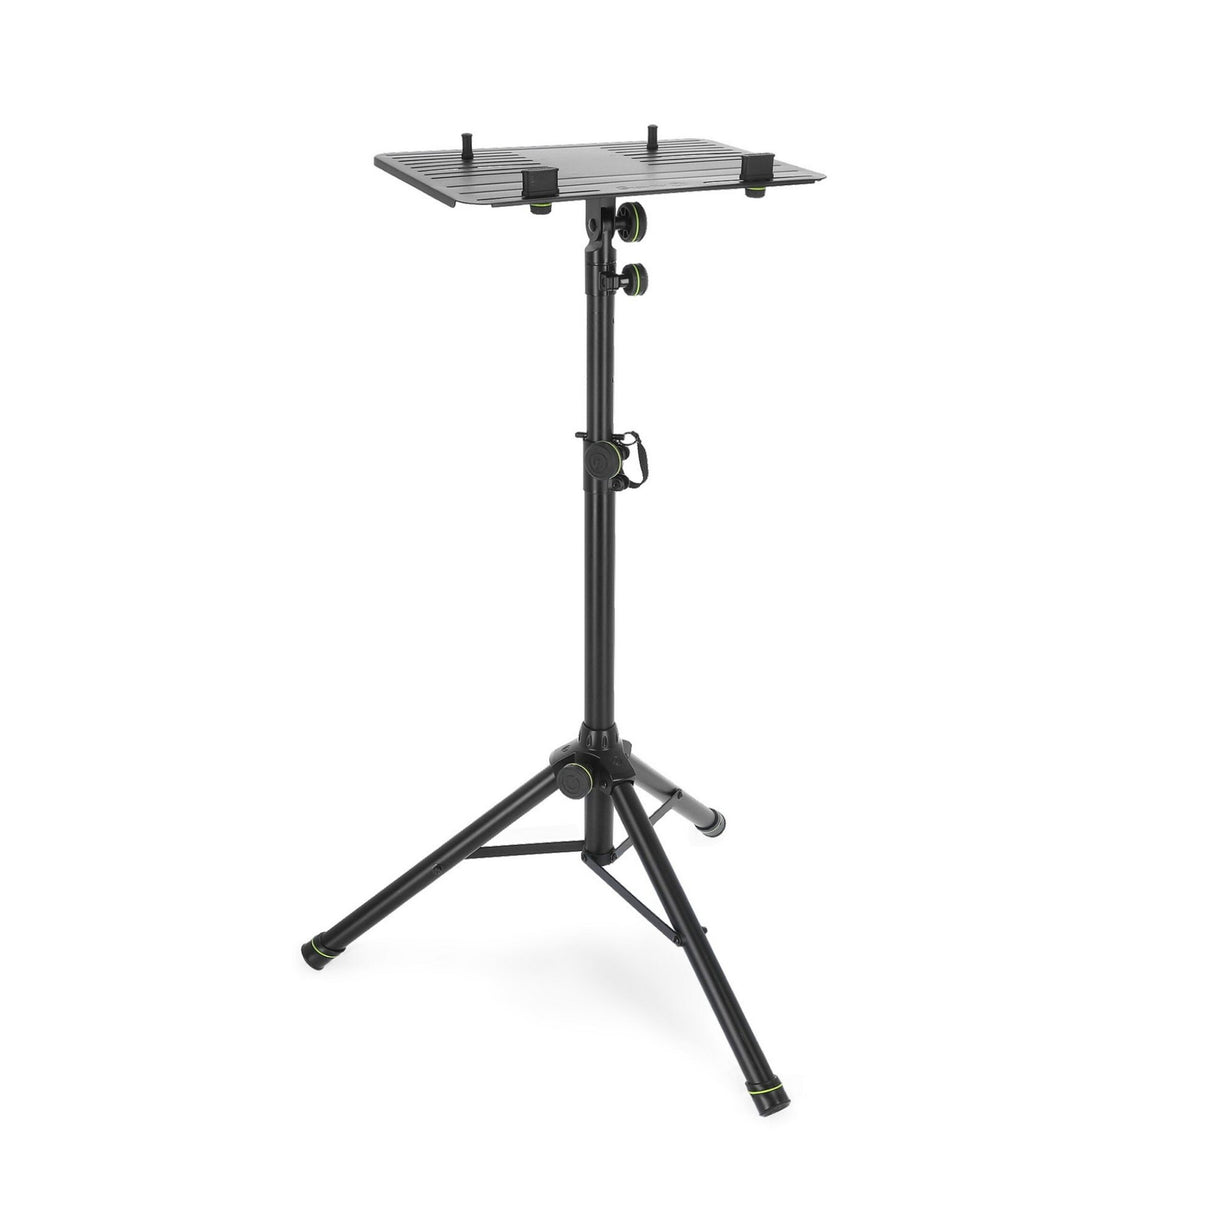 Gravity LTS T 01 Laptop Stand with Adjustable Holding Pins, Black